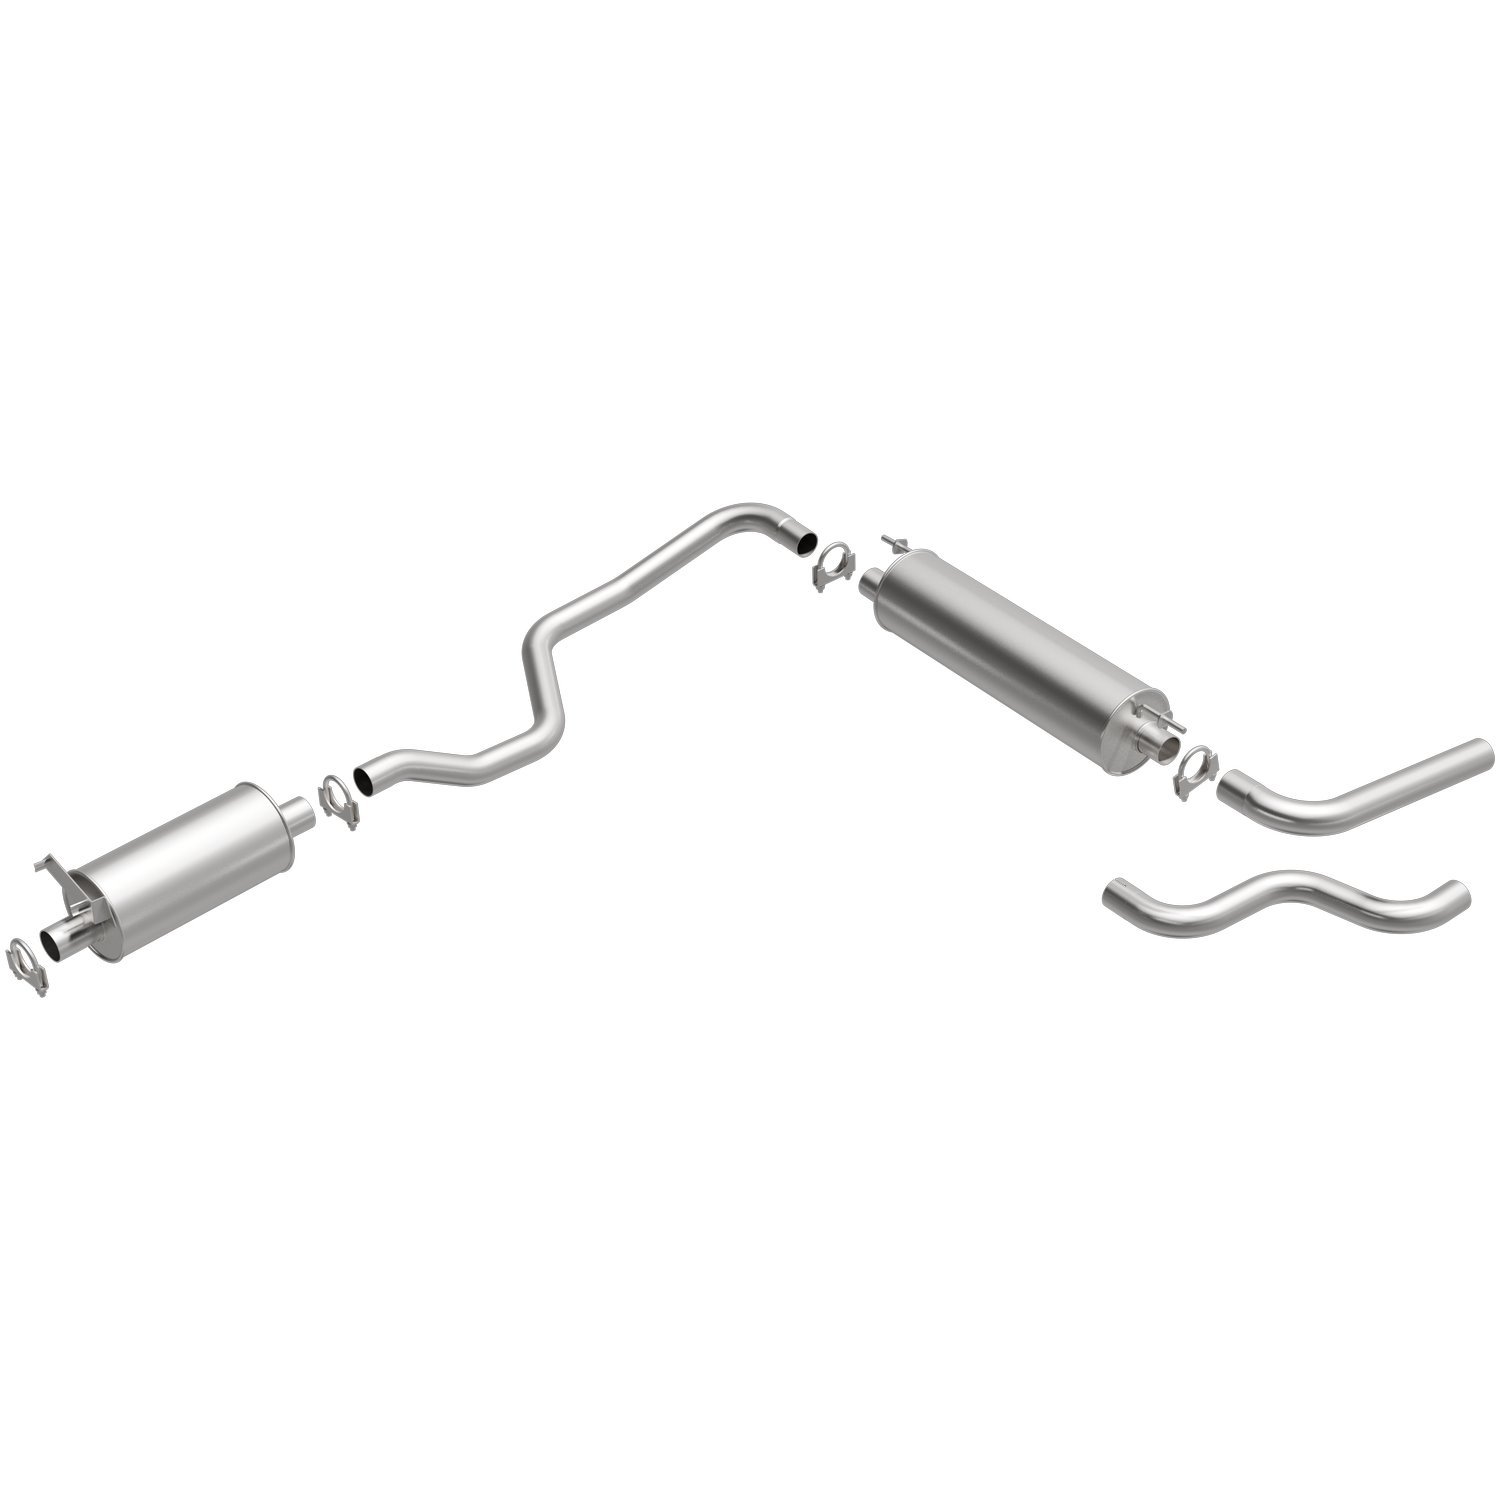 Direct-Fit Exhaust Kit, 1985-1993 Volvo 244 245 240 2.3L